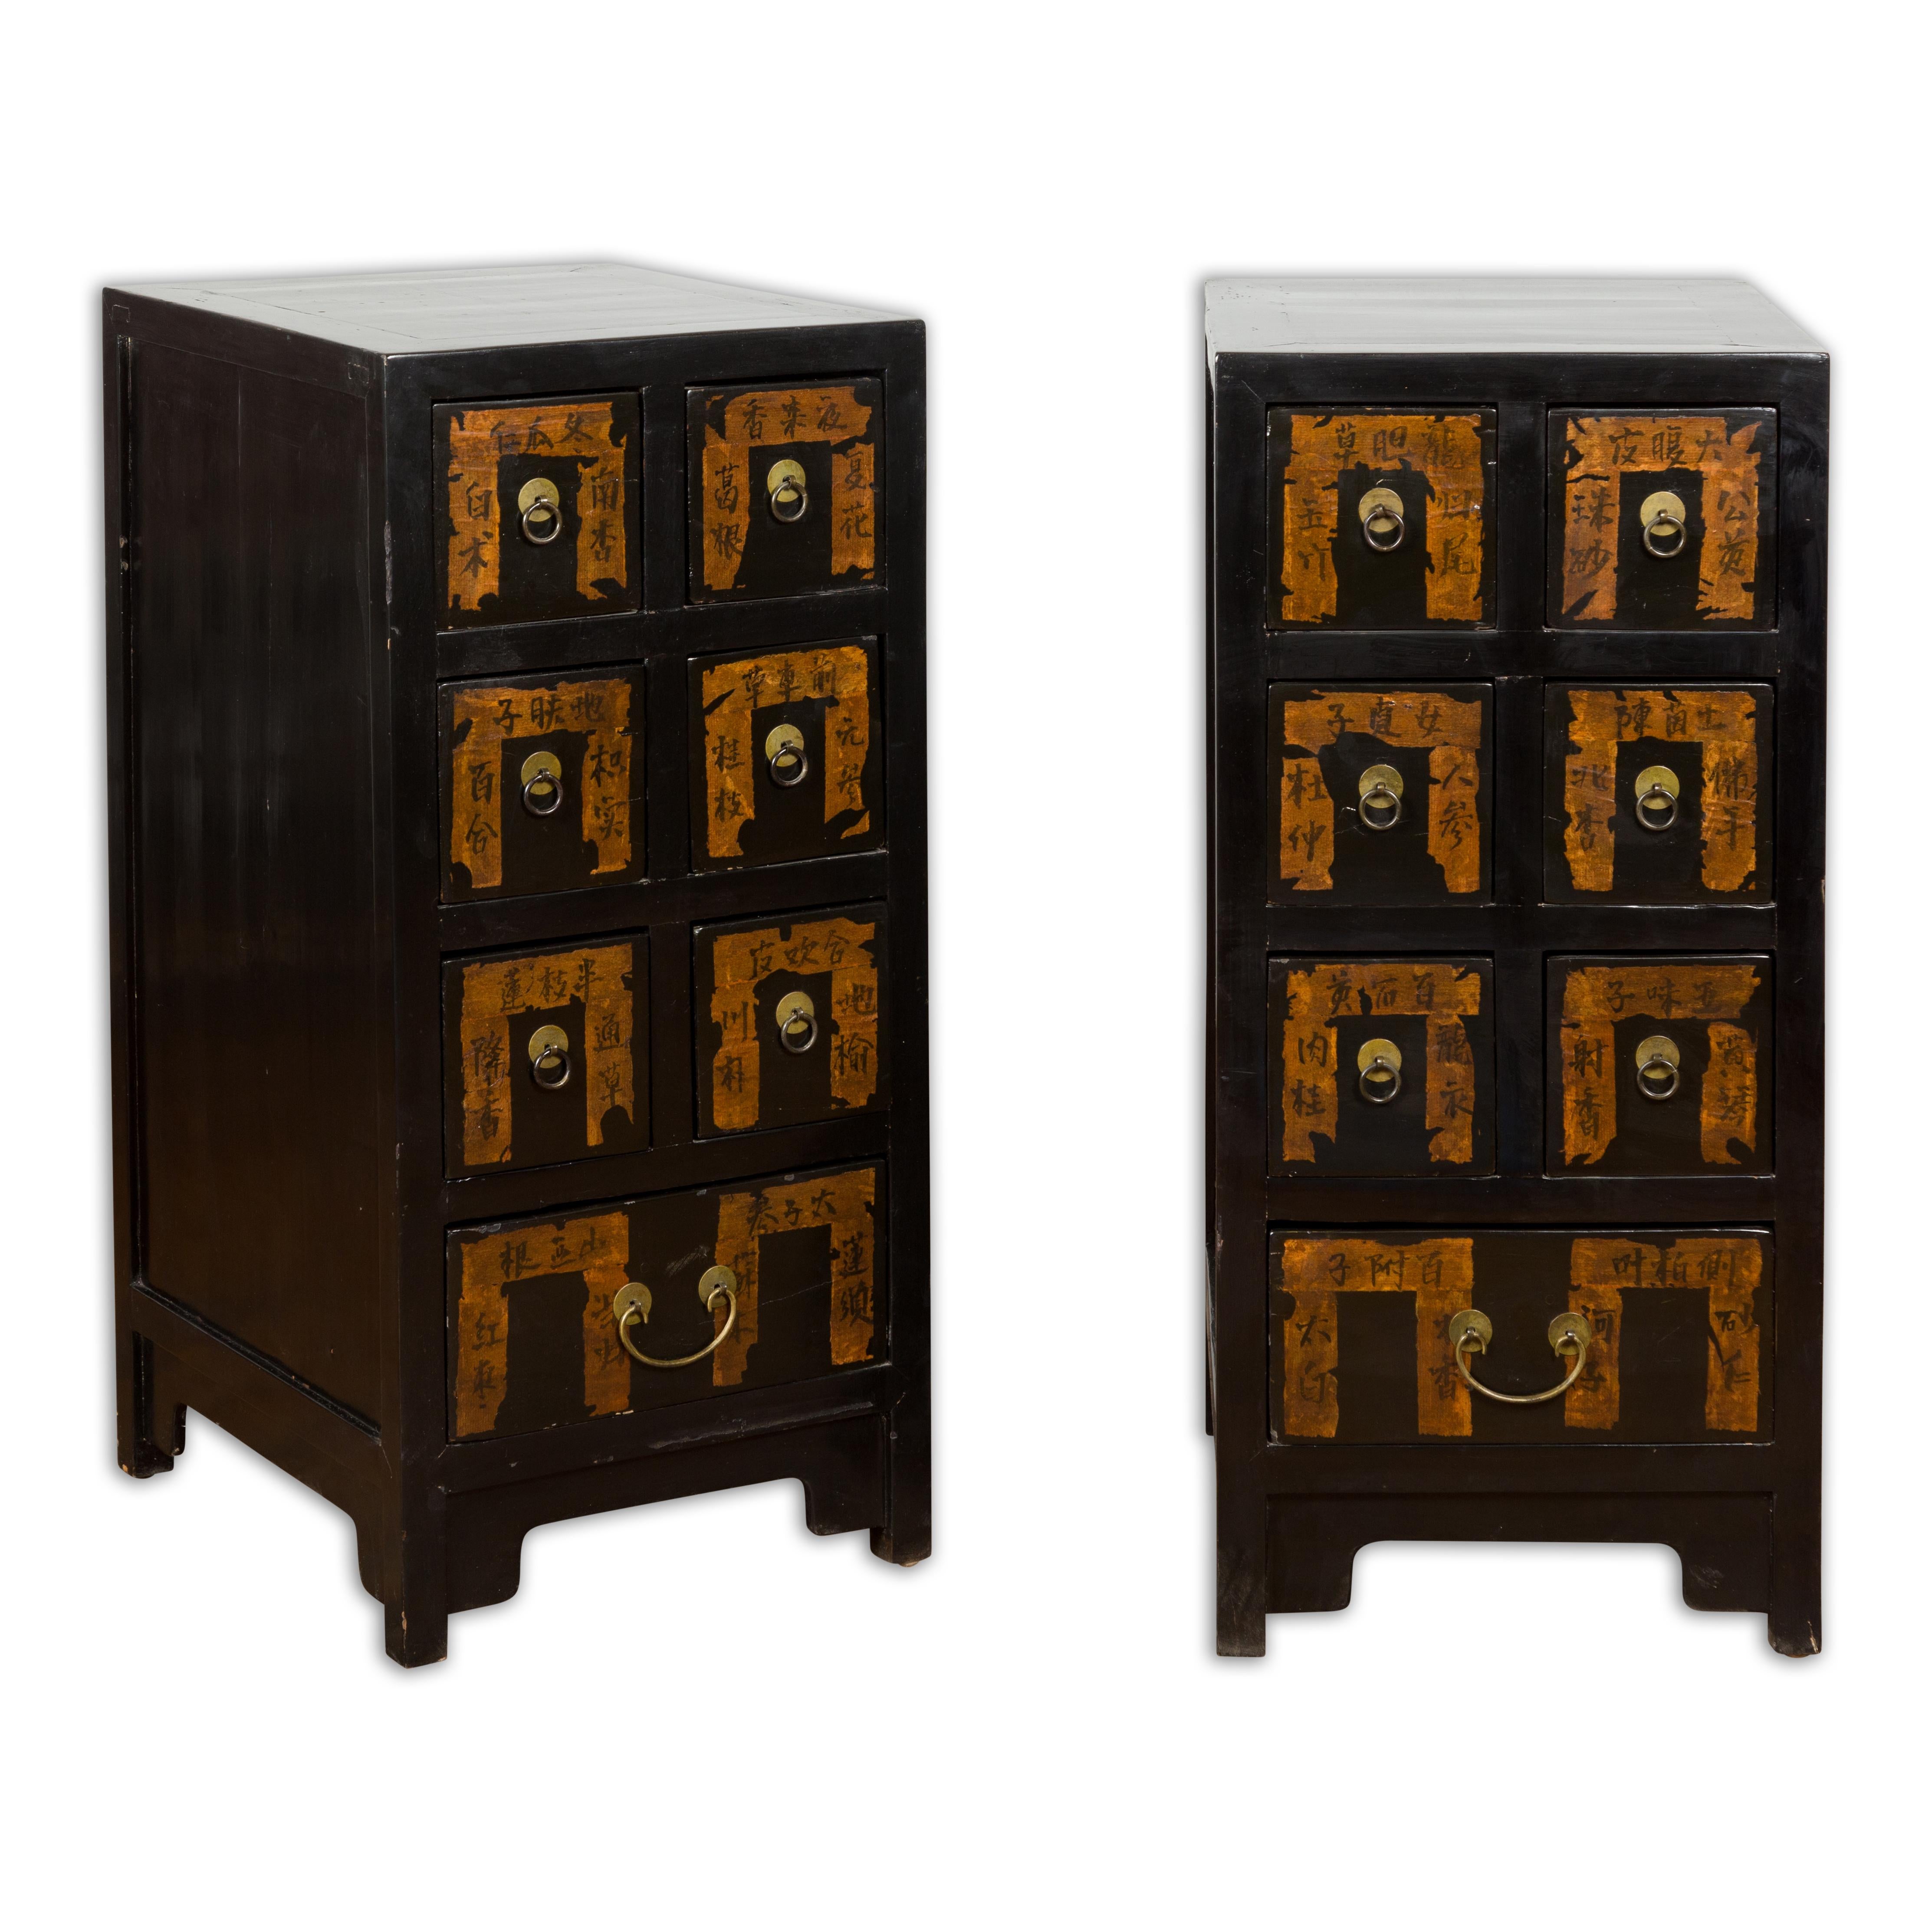 Pair of Chinese Qing Dynasty Black Lacquer Apothecary Cabinets with Calligraphy For Sale 13